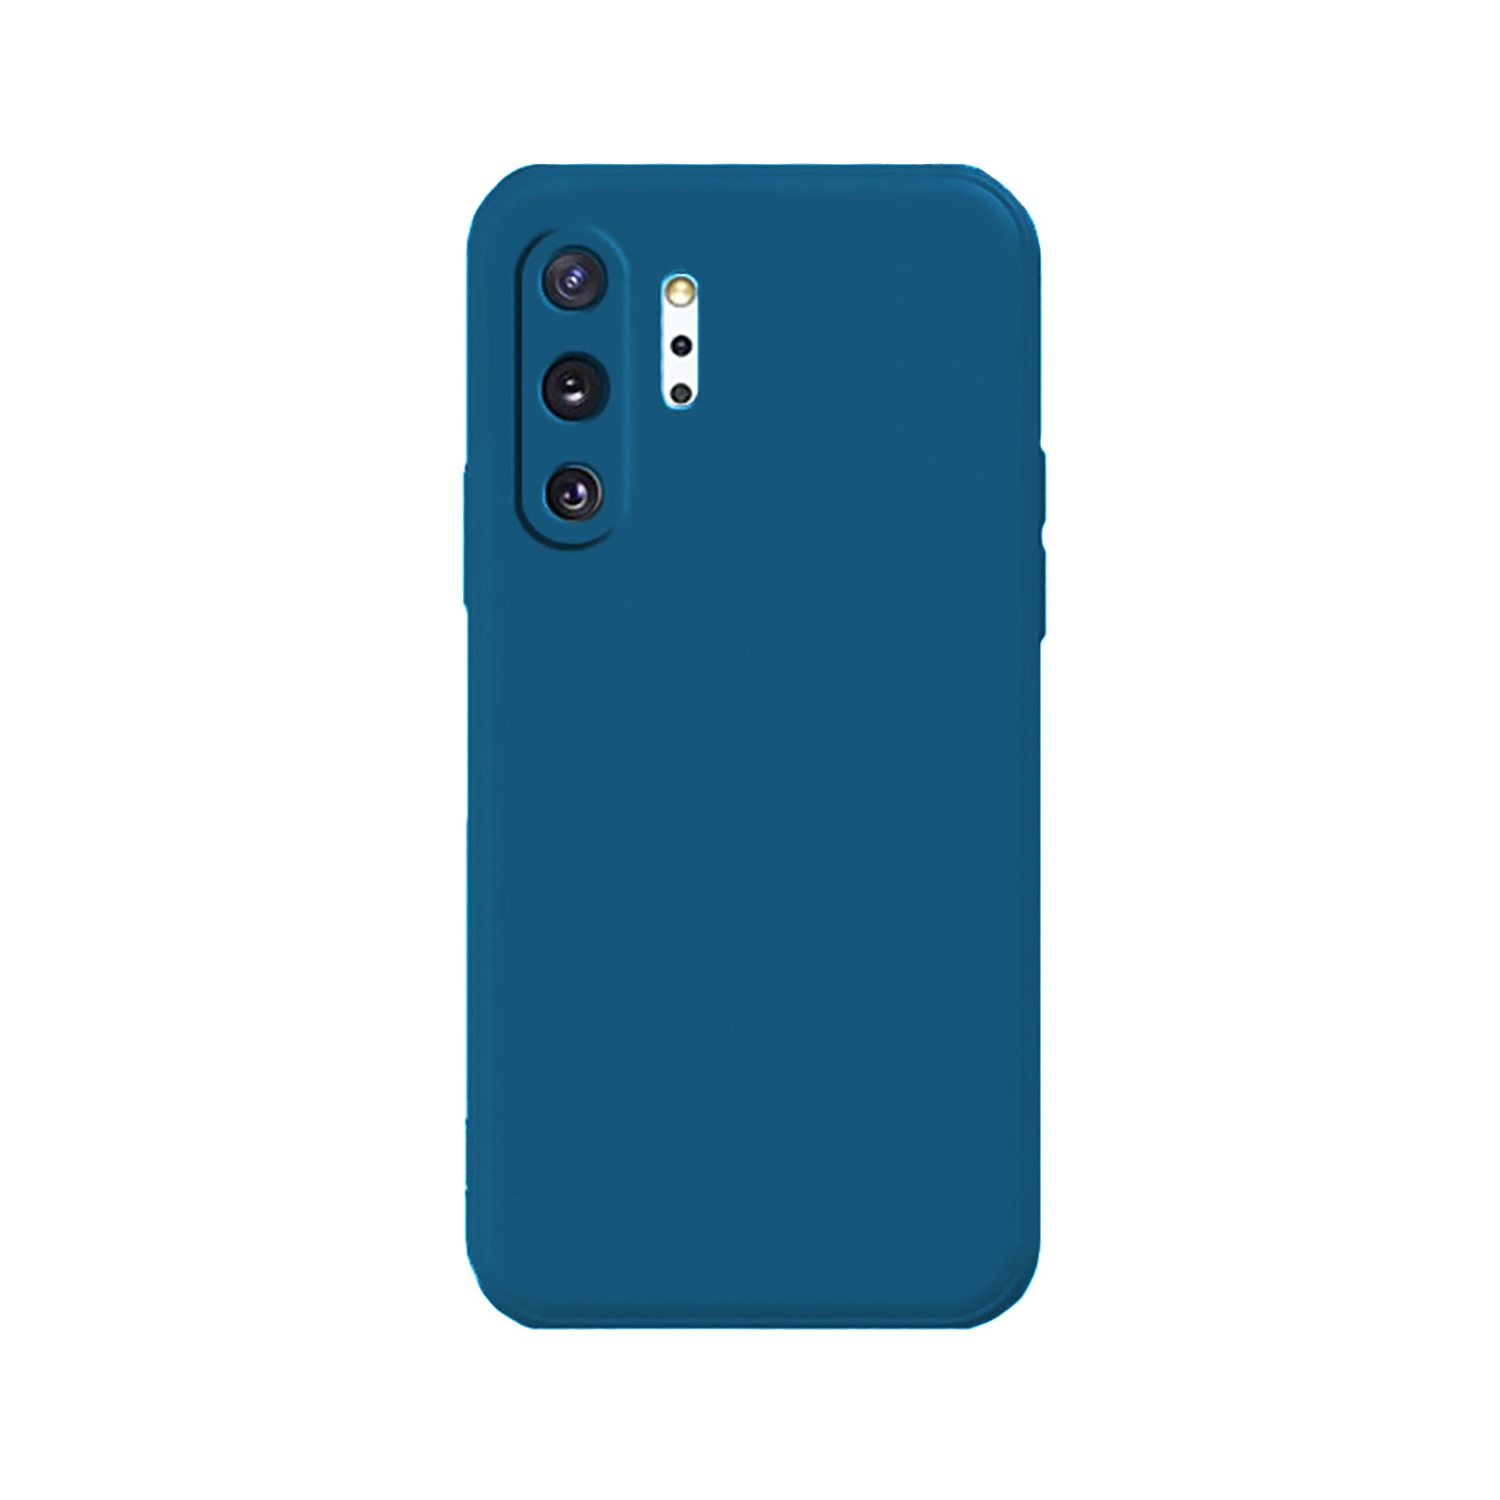 PANDACO Soft Shell Matte Navy Case for Samsung Galaxy Note 10+